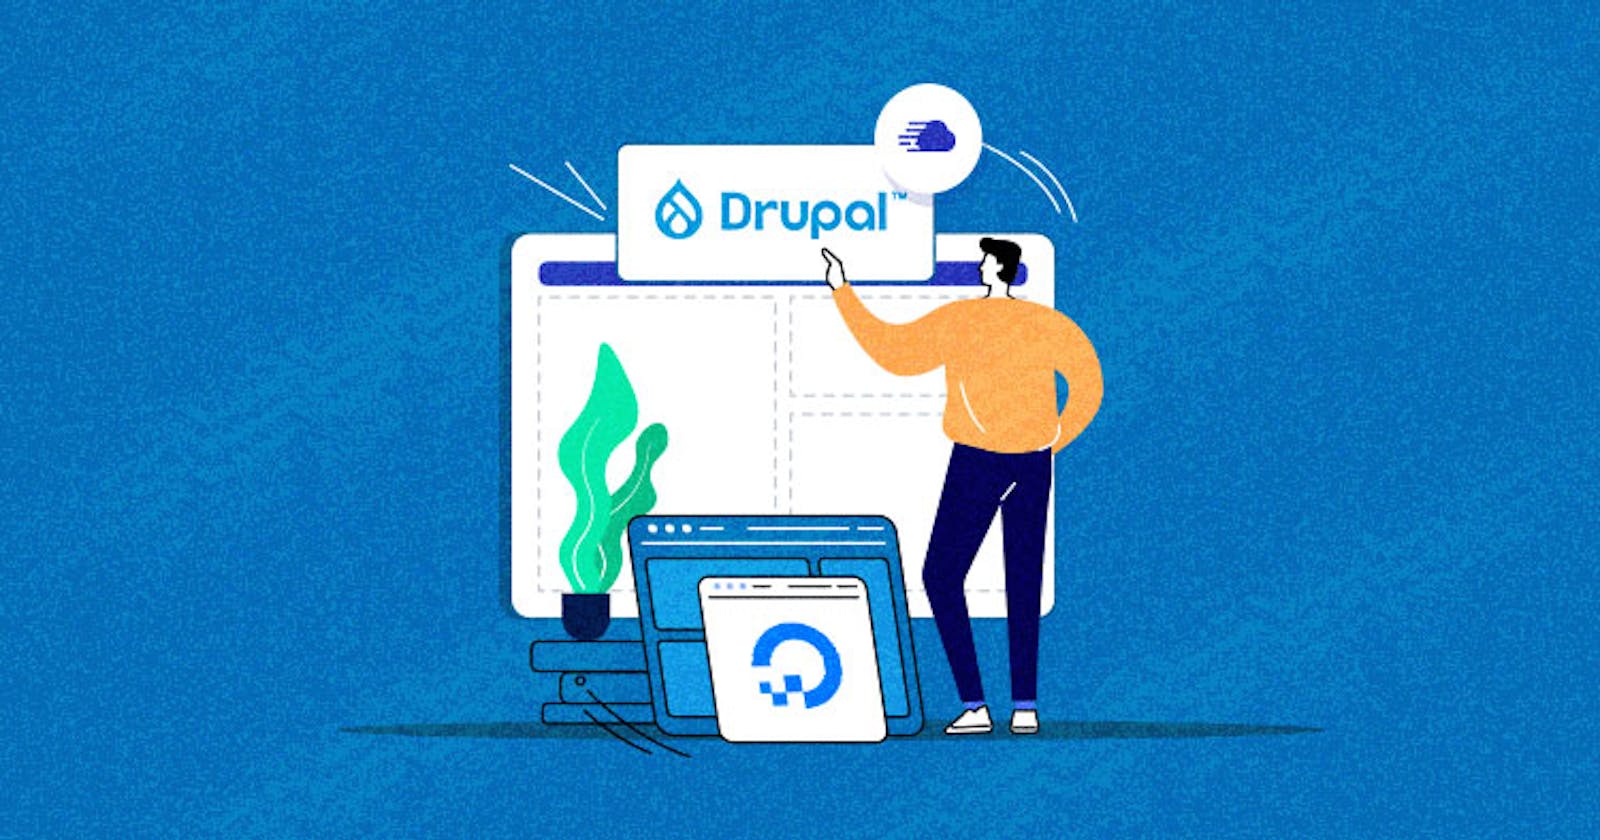 The Perfect Pairing: Why Installing Drupal on DigitalOcean is a Wise Choice